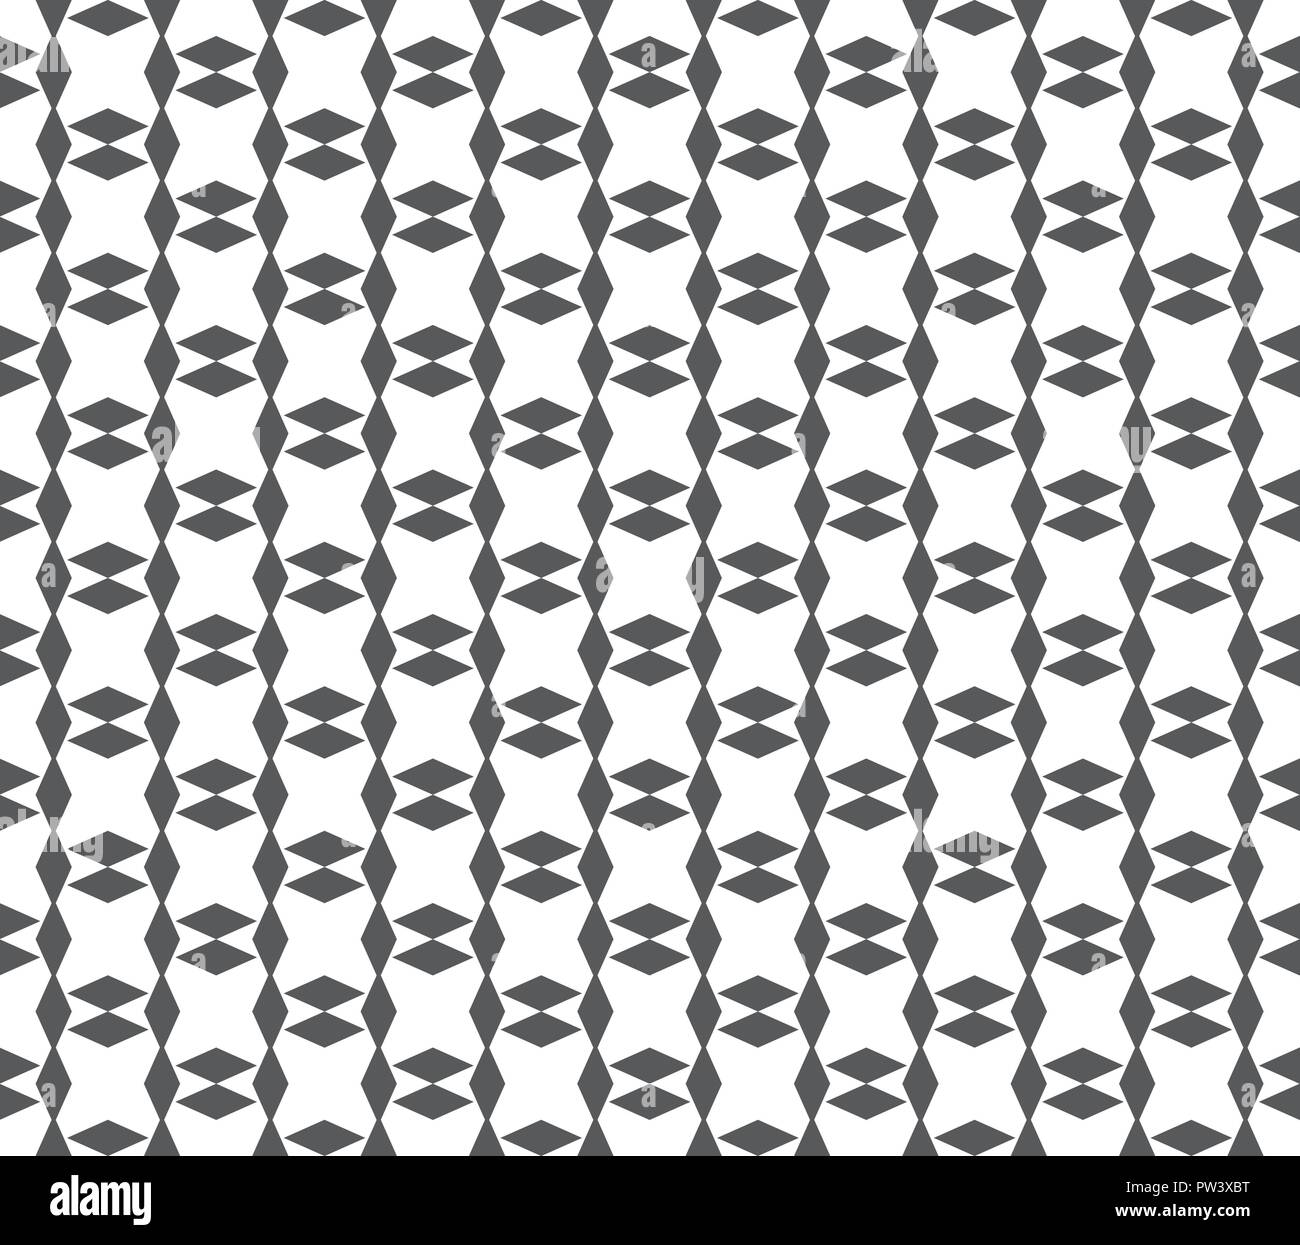 Repeating monochrome vector triangle pattern Cut Out Stock Images